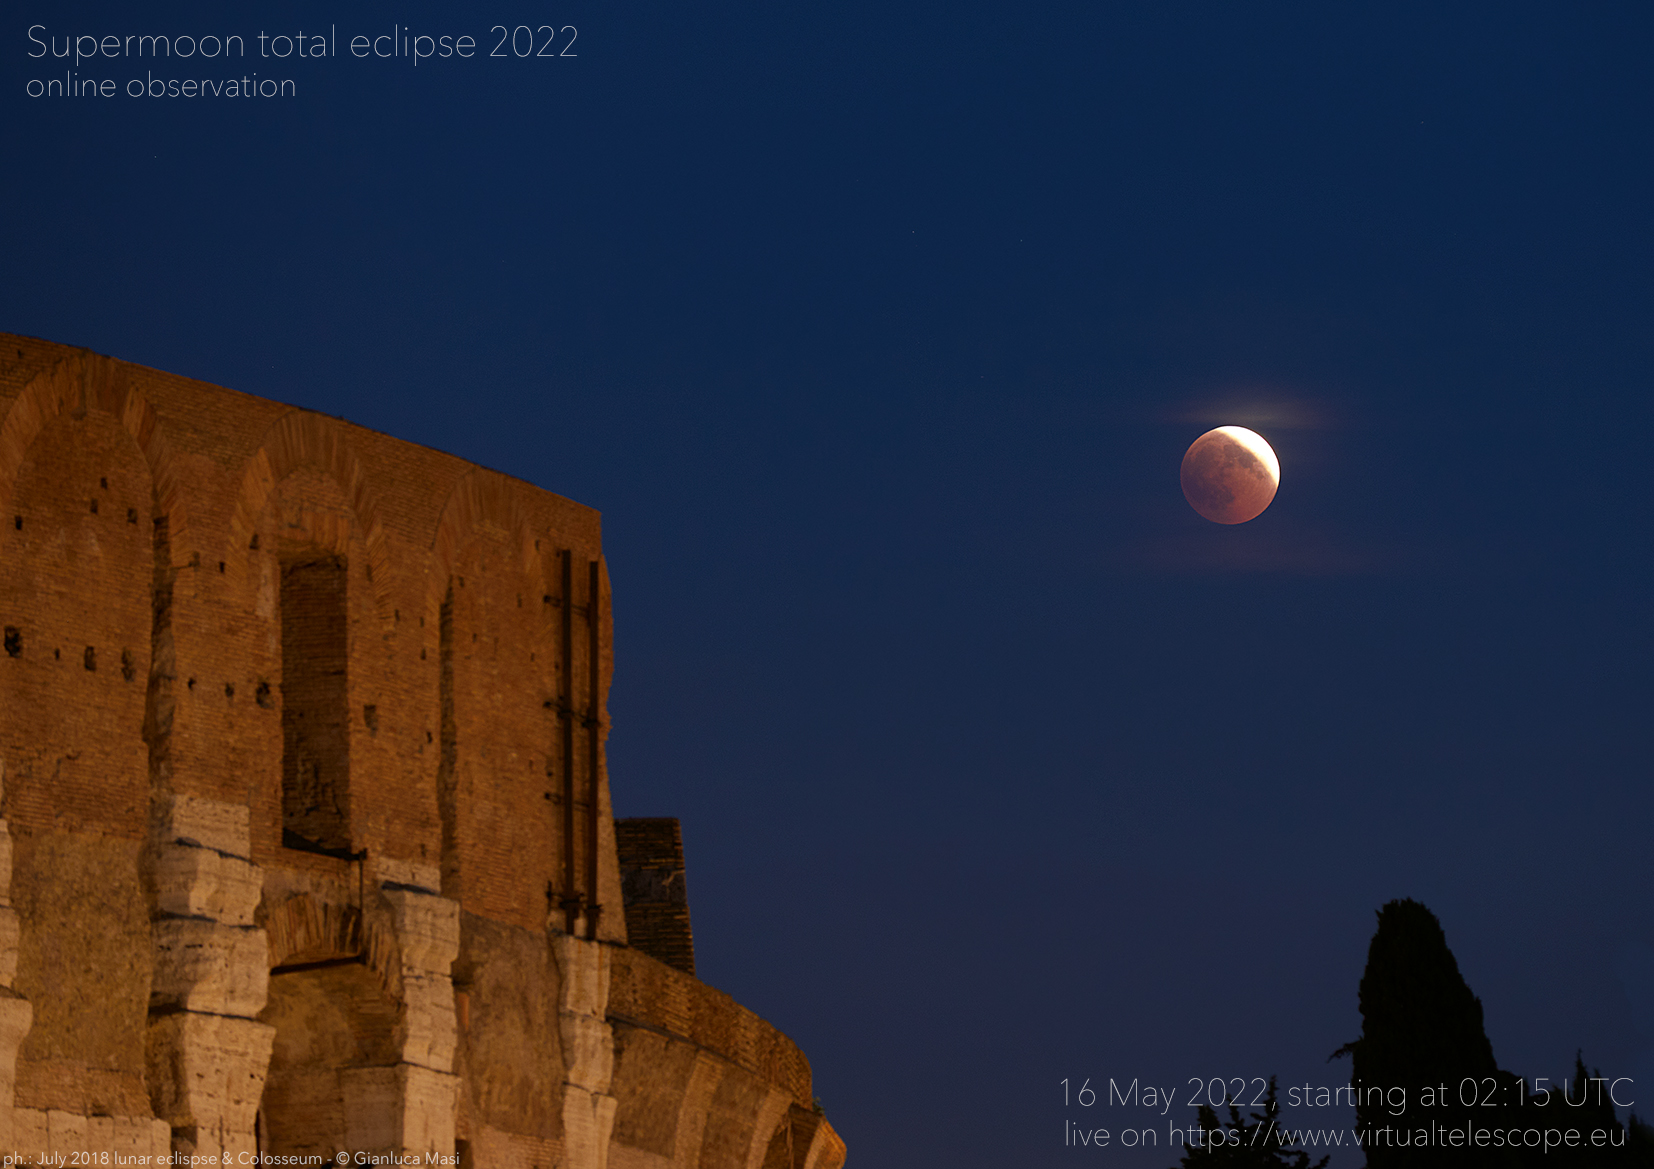 Total “Supermoon” eclipse 2022: poster of the event.